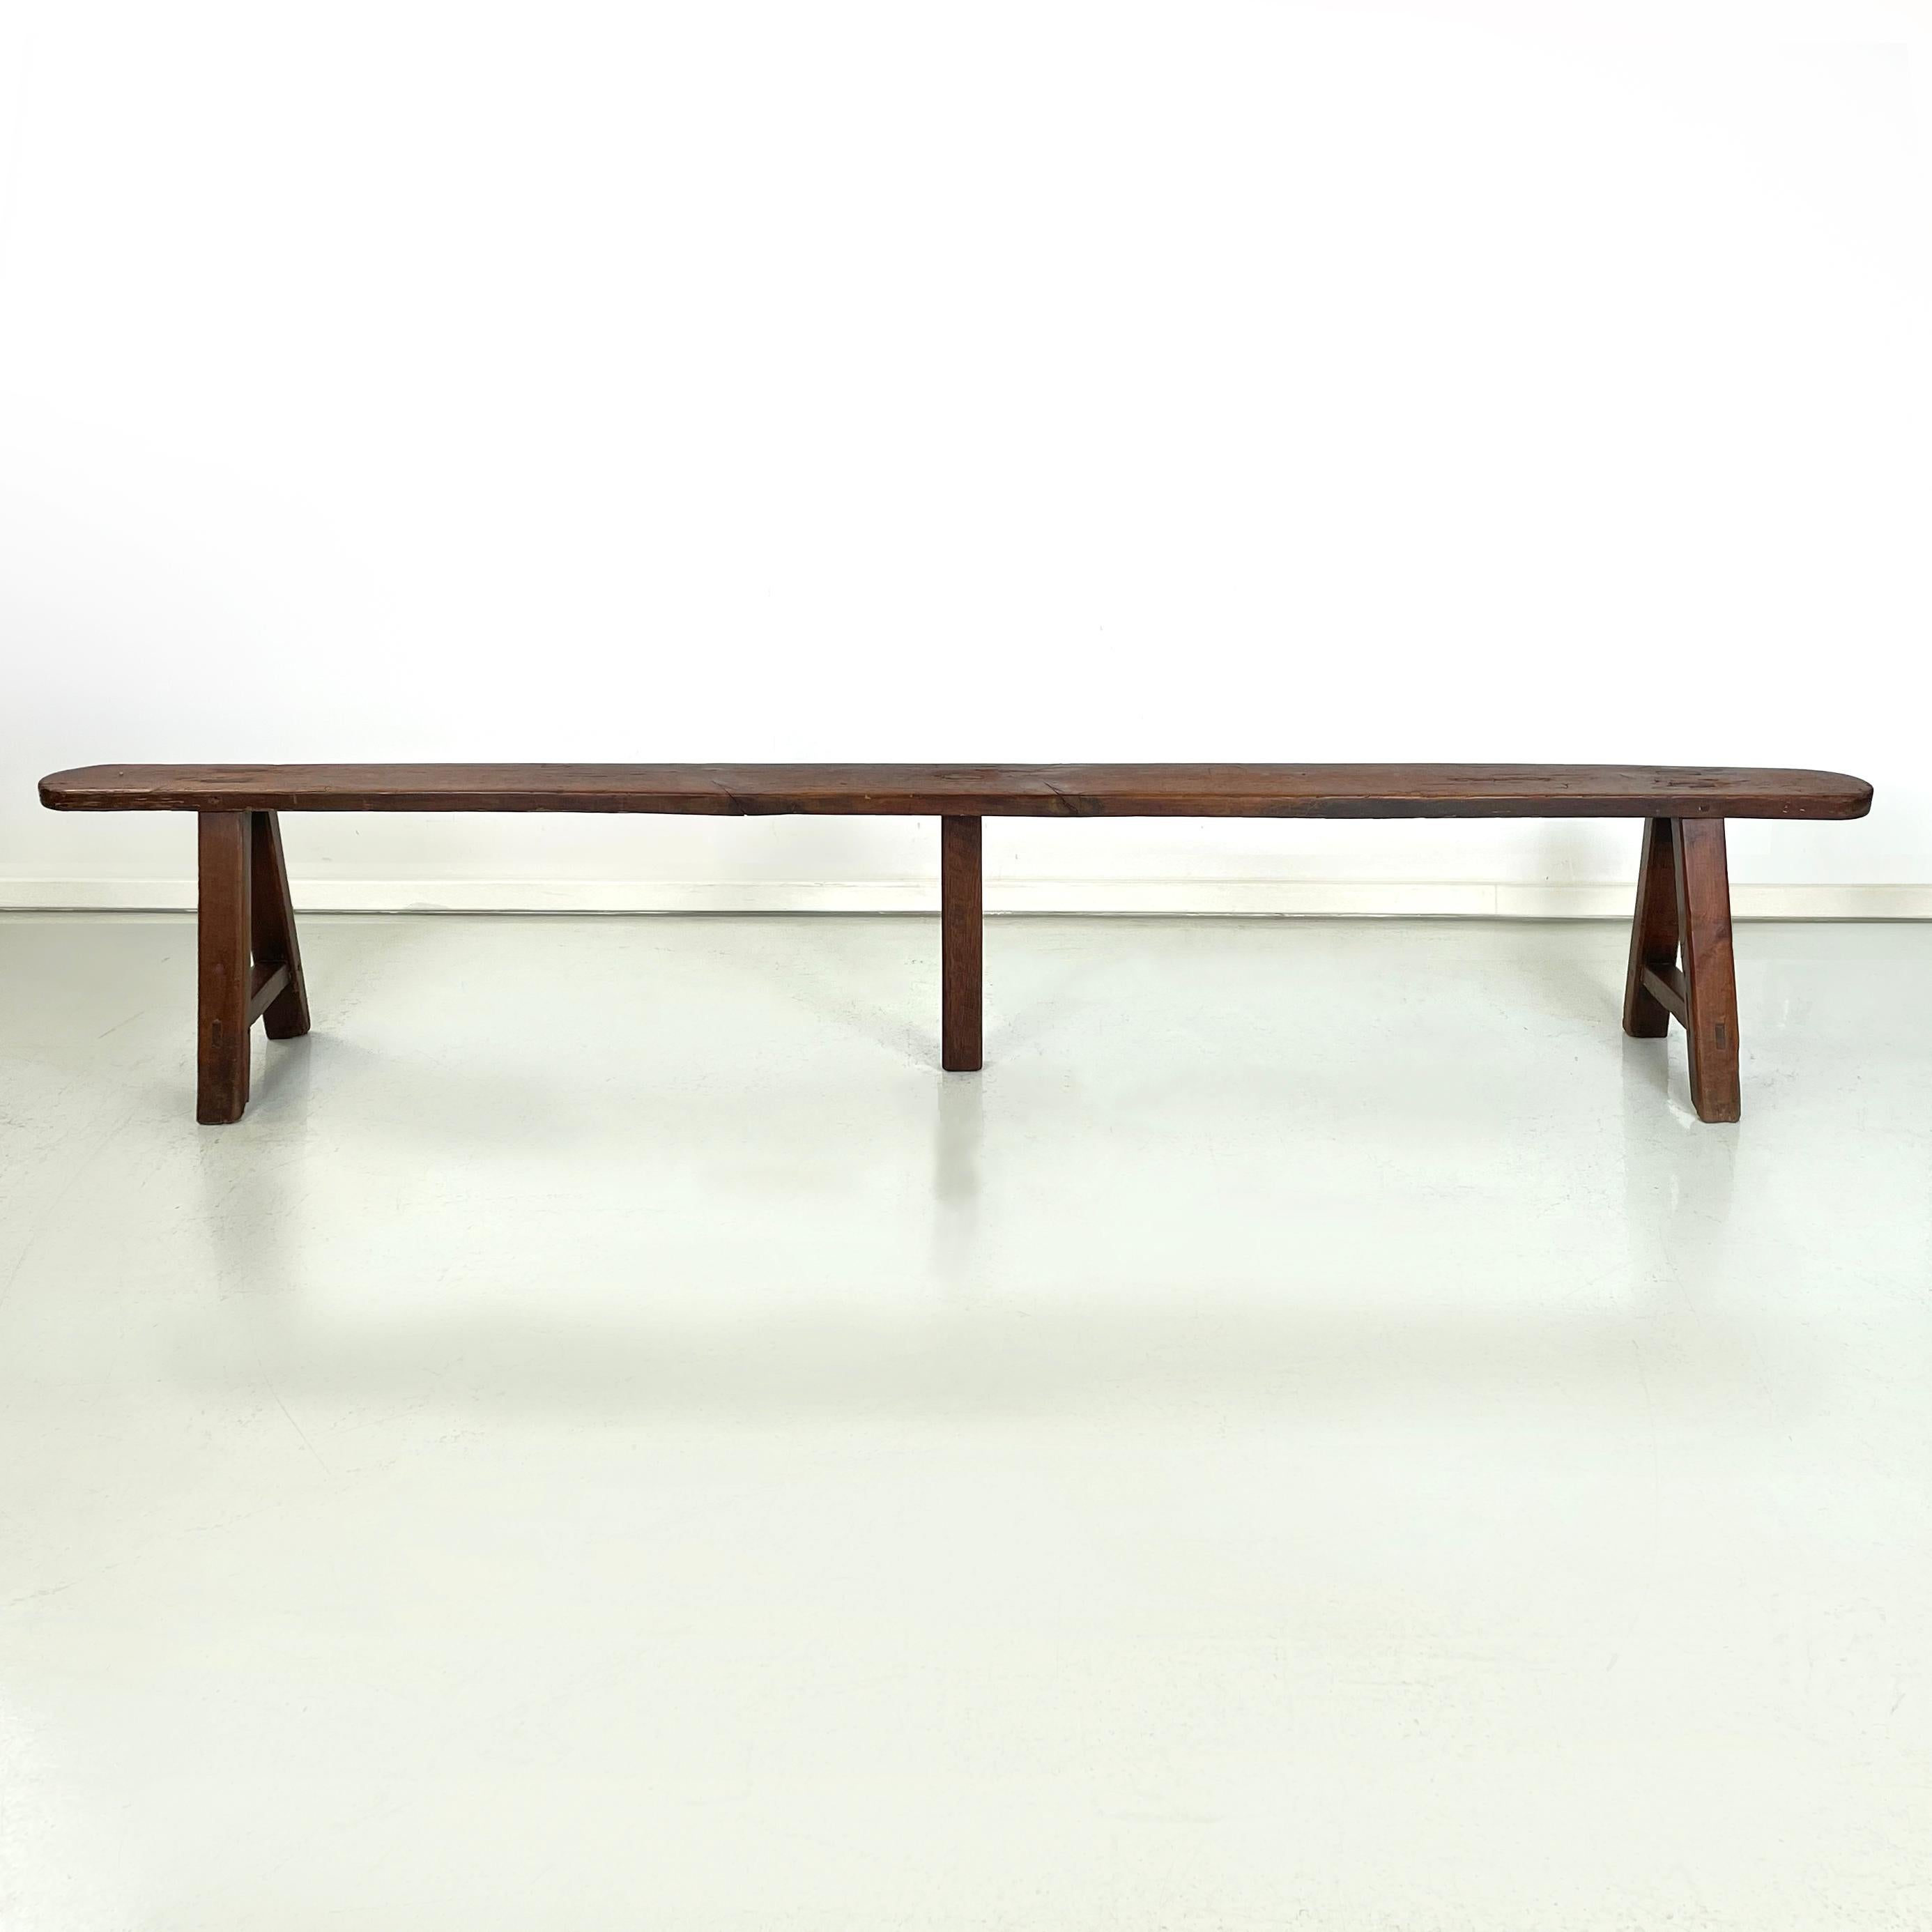 French mid-century Wooden bench with narrow and long seat, 1930s
Bench with narrow and long seat with rounded corners, entirely in solid wood. The legs with a square section facing outwards are positioned diagonally joined by a strip, while the